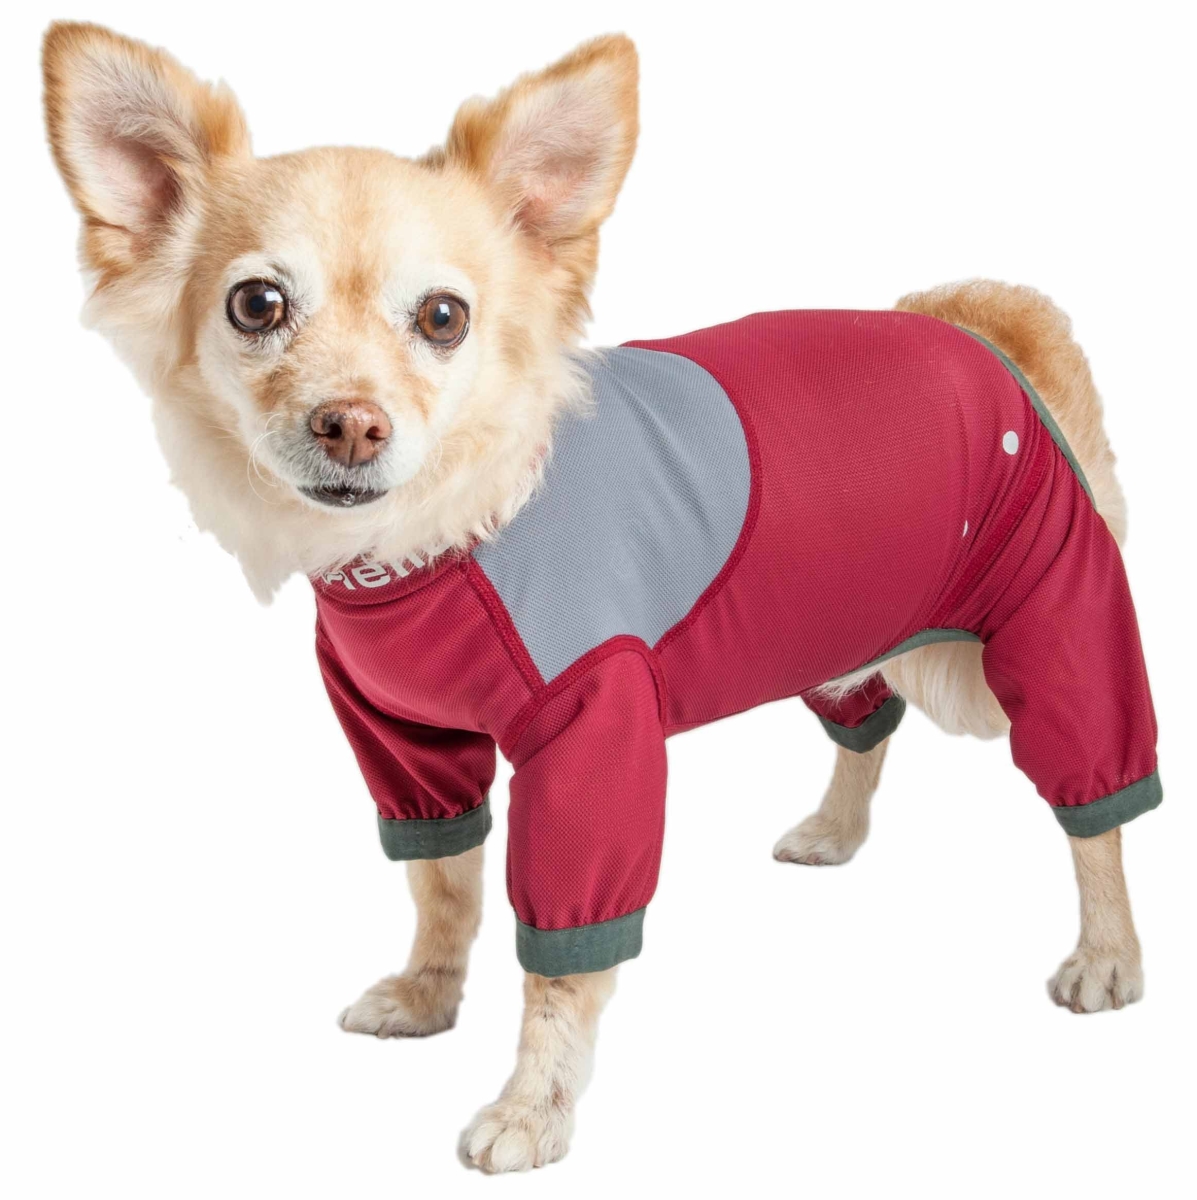 Yghl9rdxl Tail Runner 4-way-stretch Breathable Full Bodied Performance Dog Track Suit - Red & Grey, Extra Large